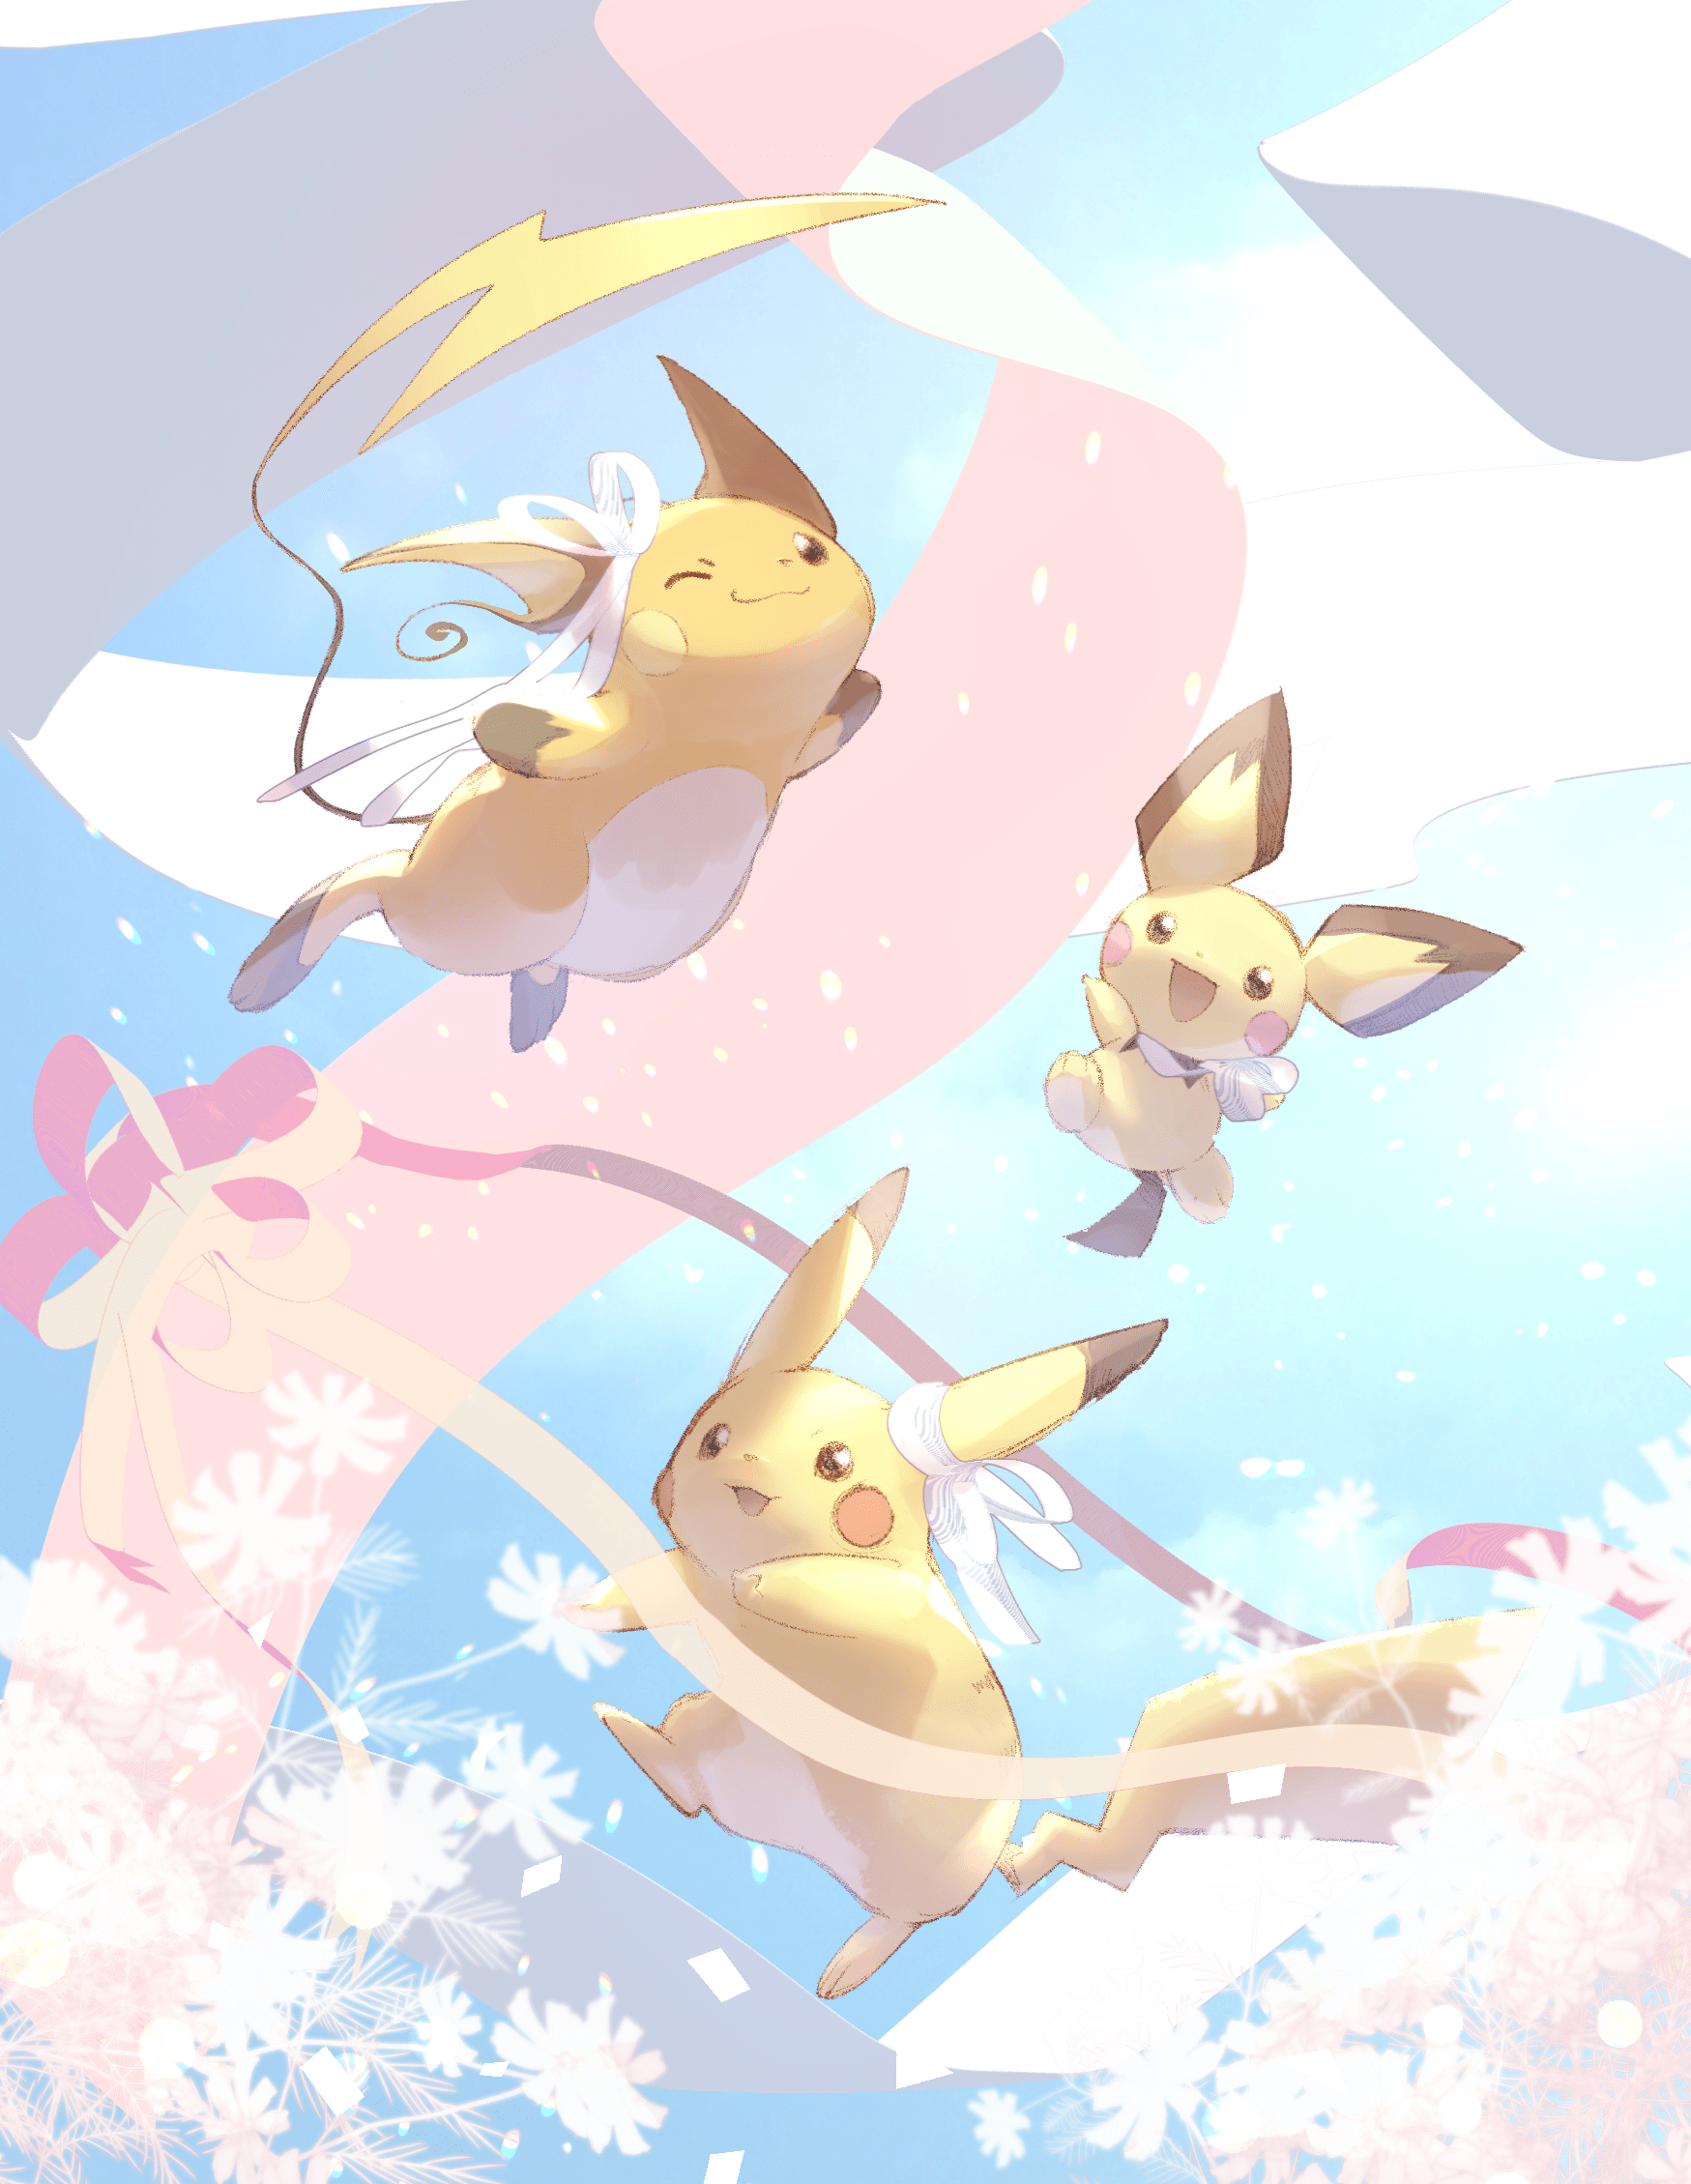 A group of Eeveelutions flying in the sky - Pikachu